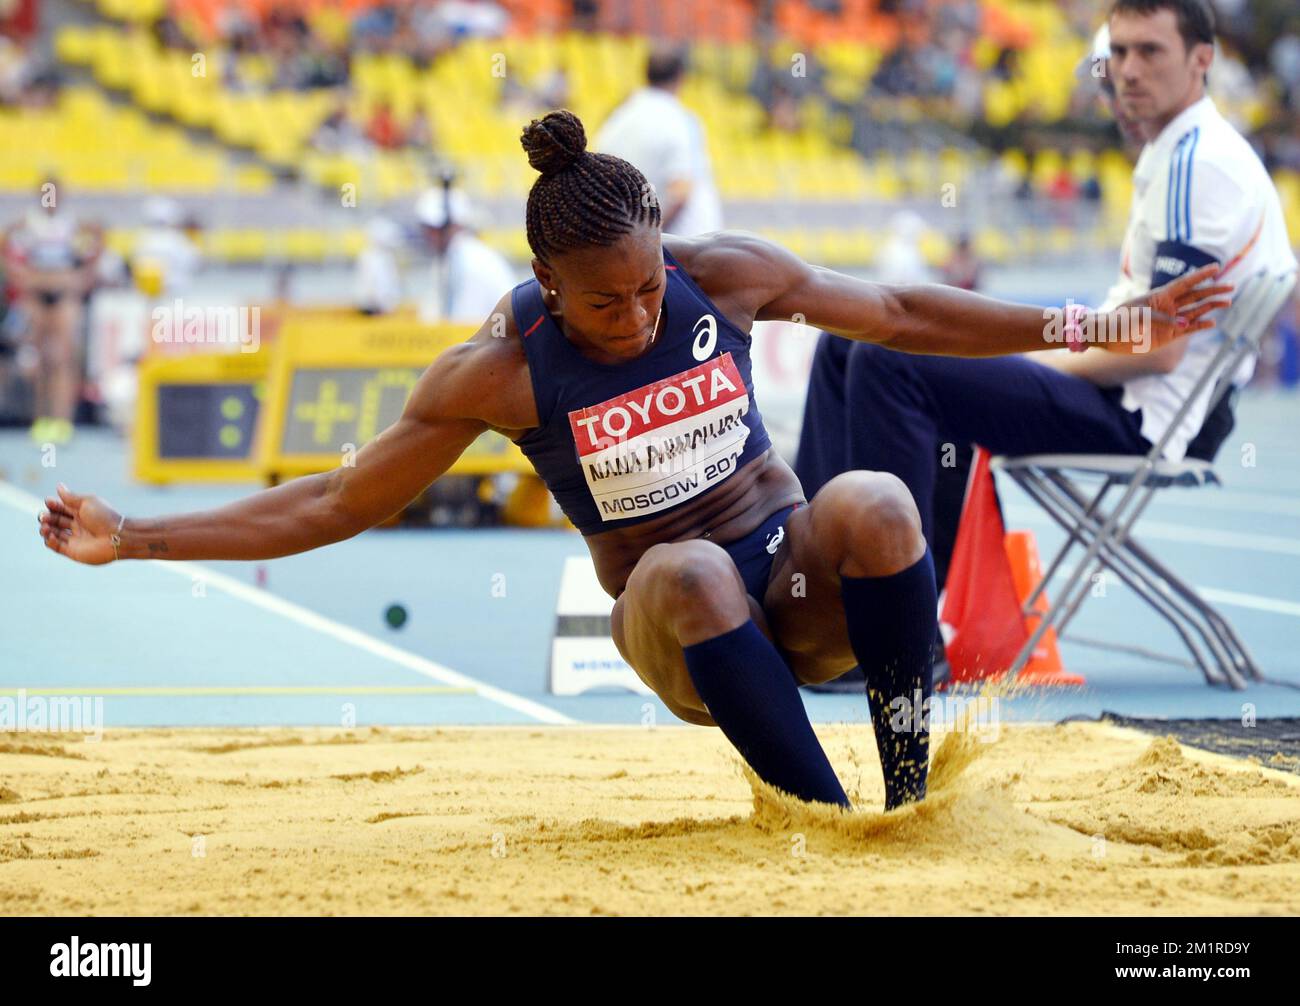 French Antoinette Nana Djimou Ida in action during the men's long jump competition on the second day of the women heptathlon at the World Athletics Championships at the Luzhniki Stadium in Moscow, Russia, Tuesday 13 August 2013. The World Championships are taking place from 10 to 18 August.  Stock Photo